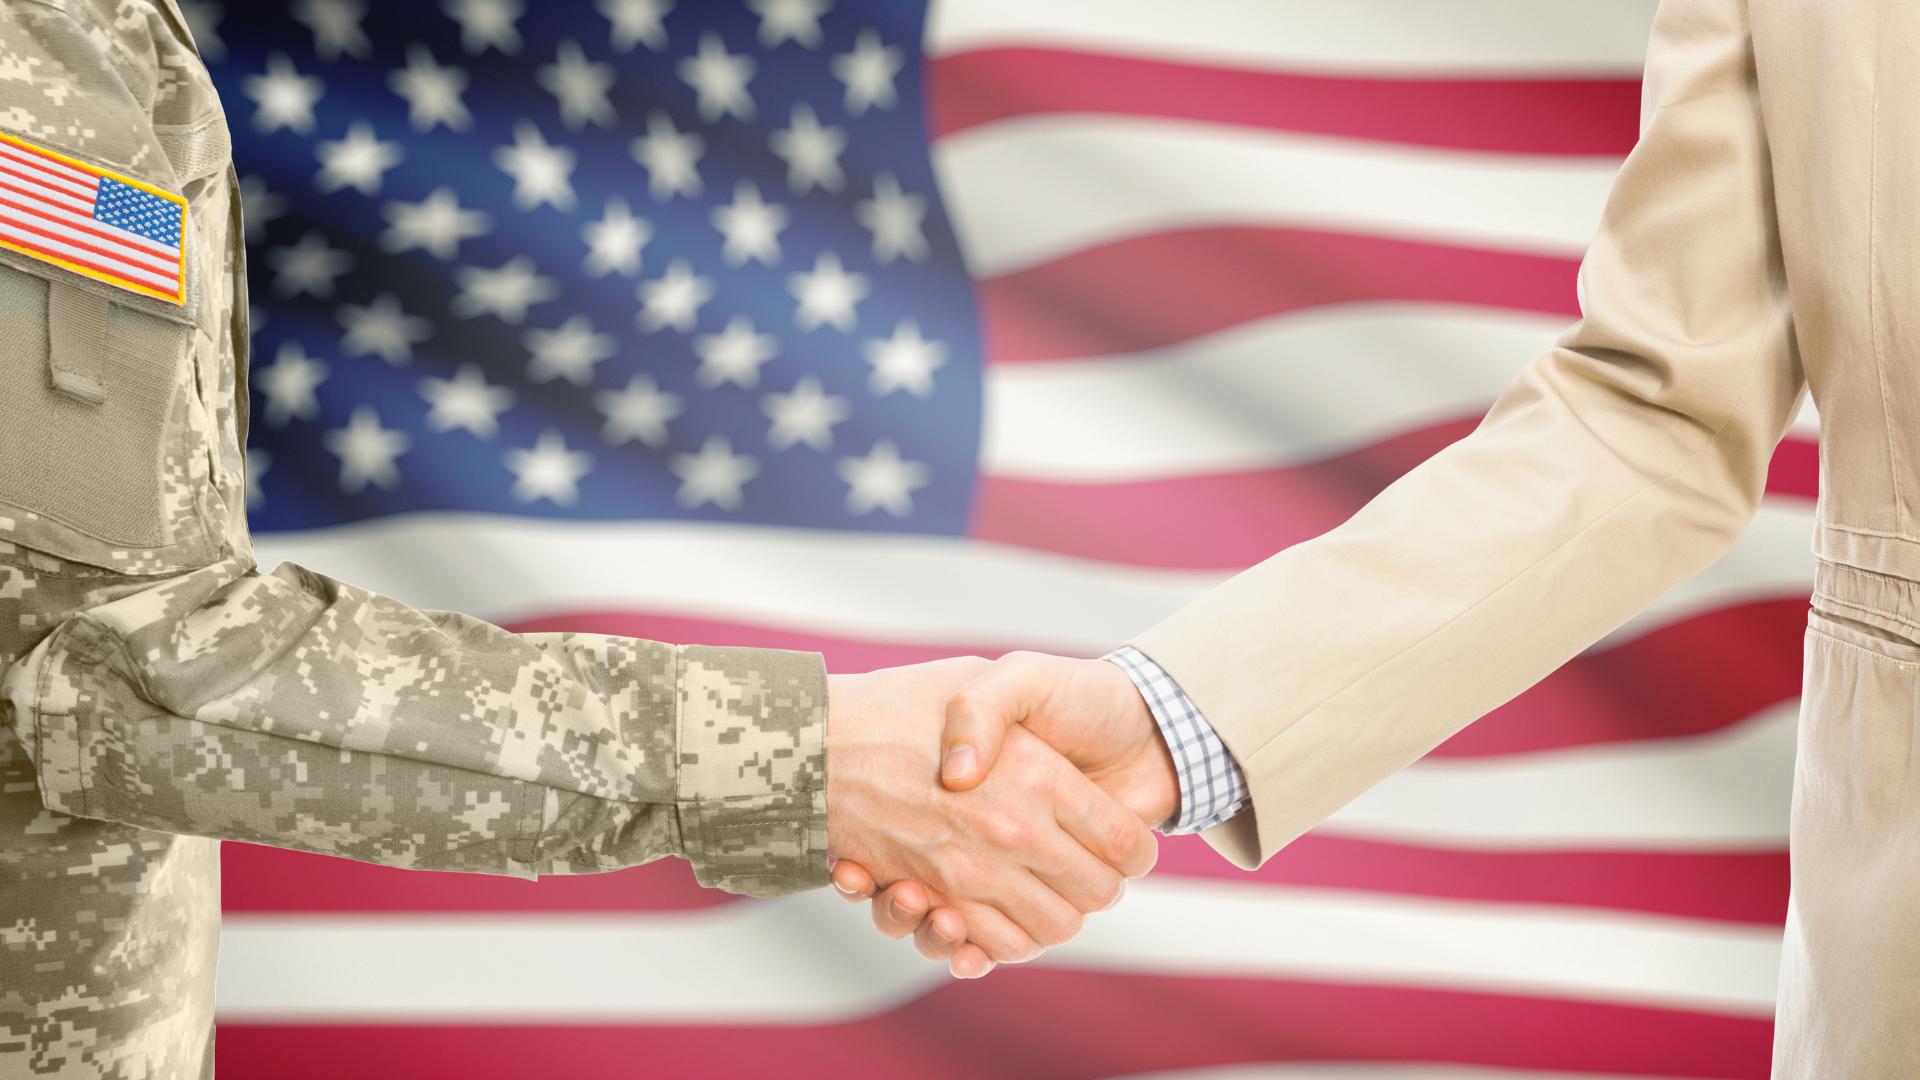 Photo of handshake between person in military uniform and person in a suit in front of an American flag